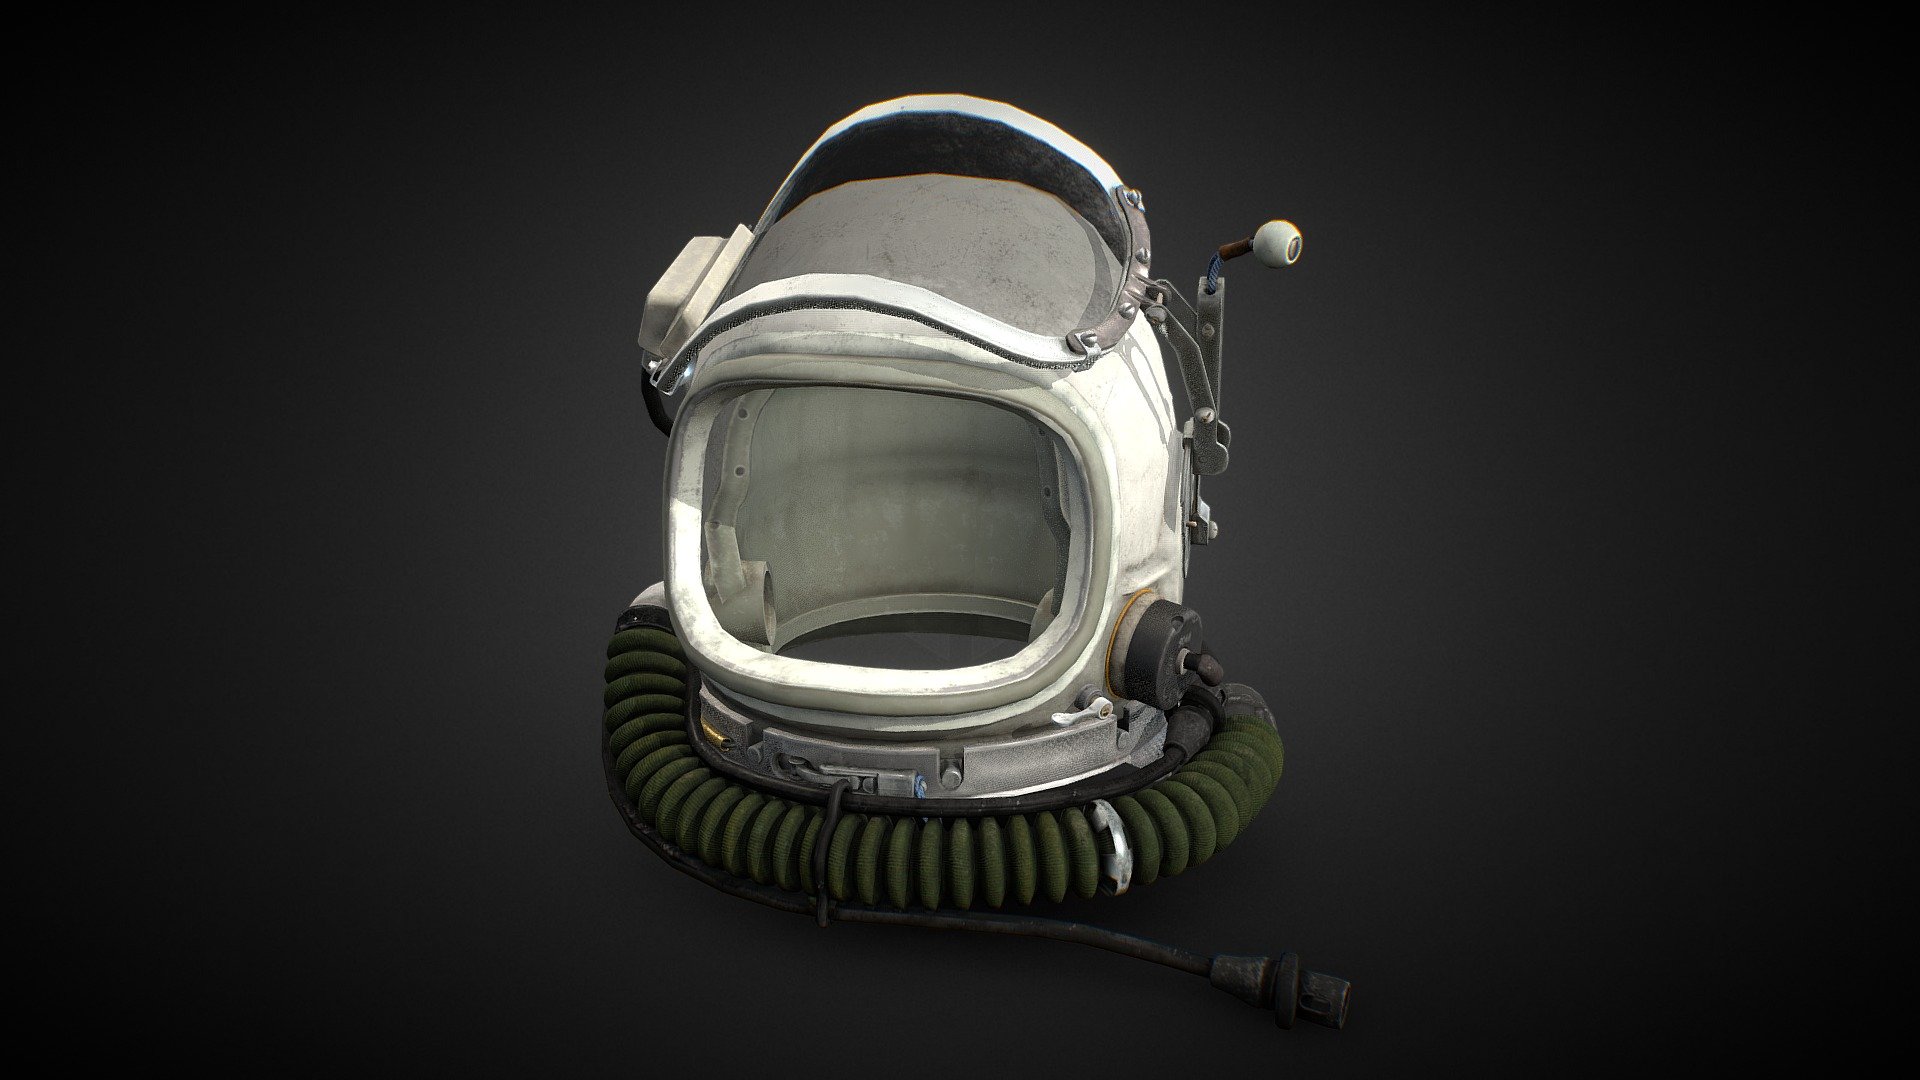 Something to challenge me! Model of a Russian Cosmonaut Helmet.

Modelled in 3DSMax and textured using Substance Painter 3d model